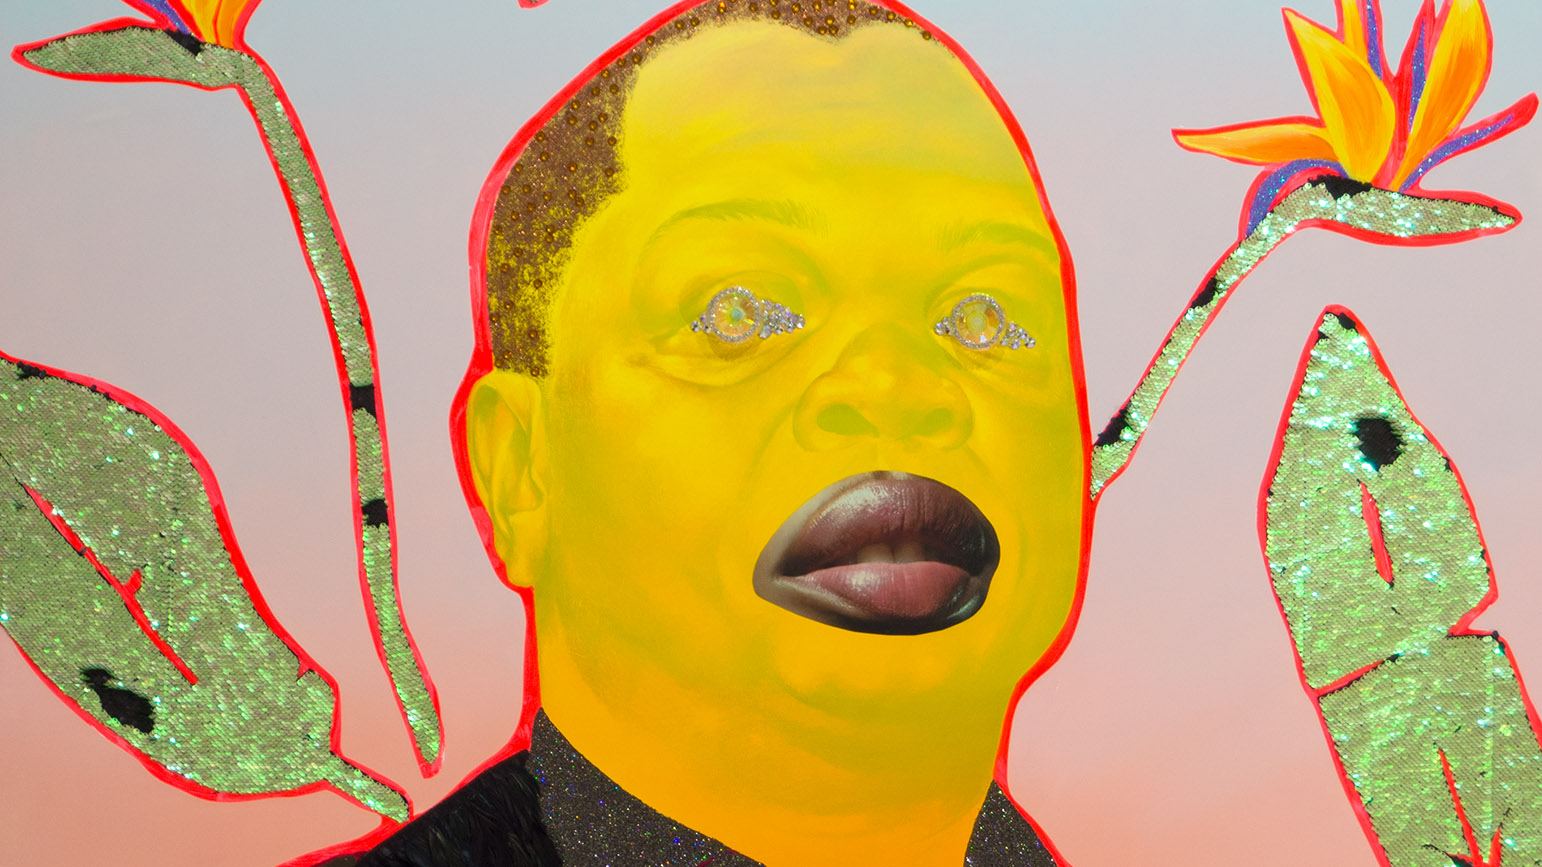 Painted portrait of Kehinde Wiley rendered in tones of yellowed with collaged photographed lips